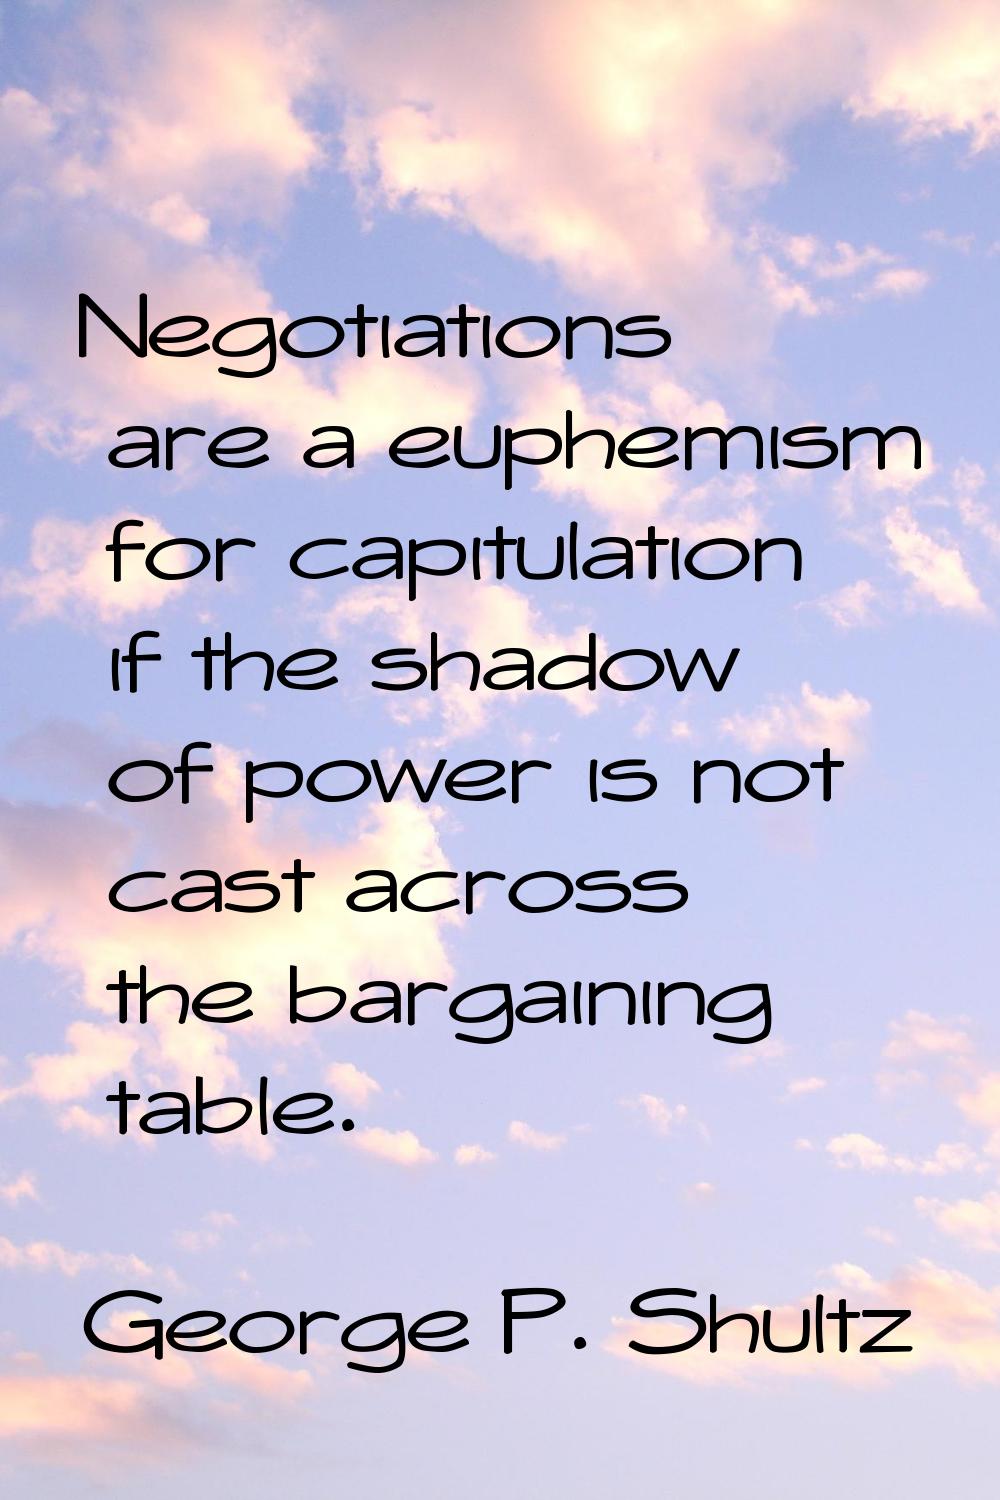 Negotiations are a euphemism for capitulation if the shadow of power is not cast across the bargain